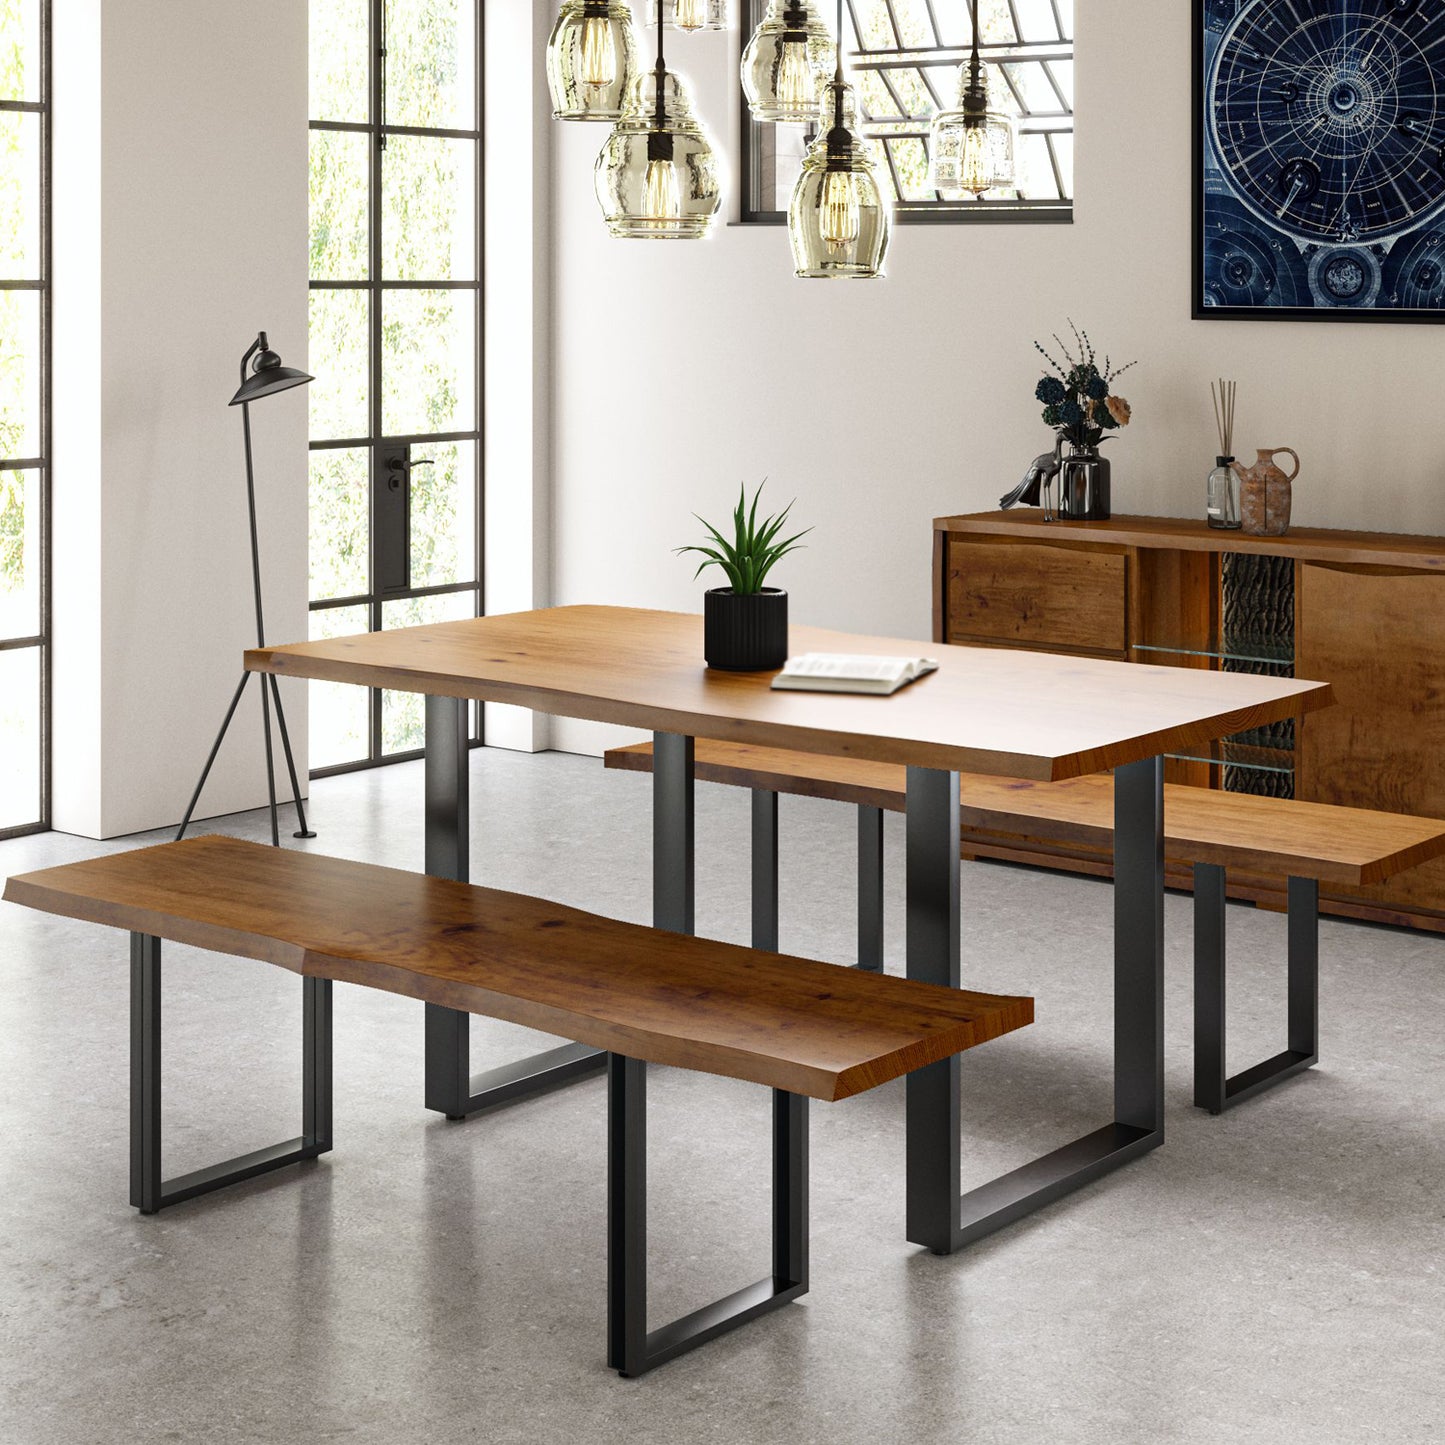 Hoxton Dining Table - With Russet Top & U Shaped Legs - 1.6m